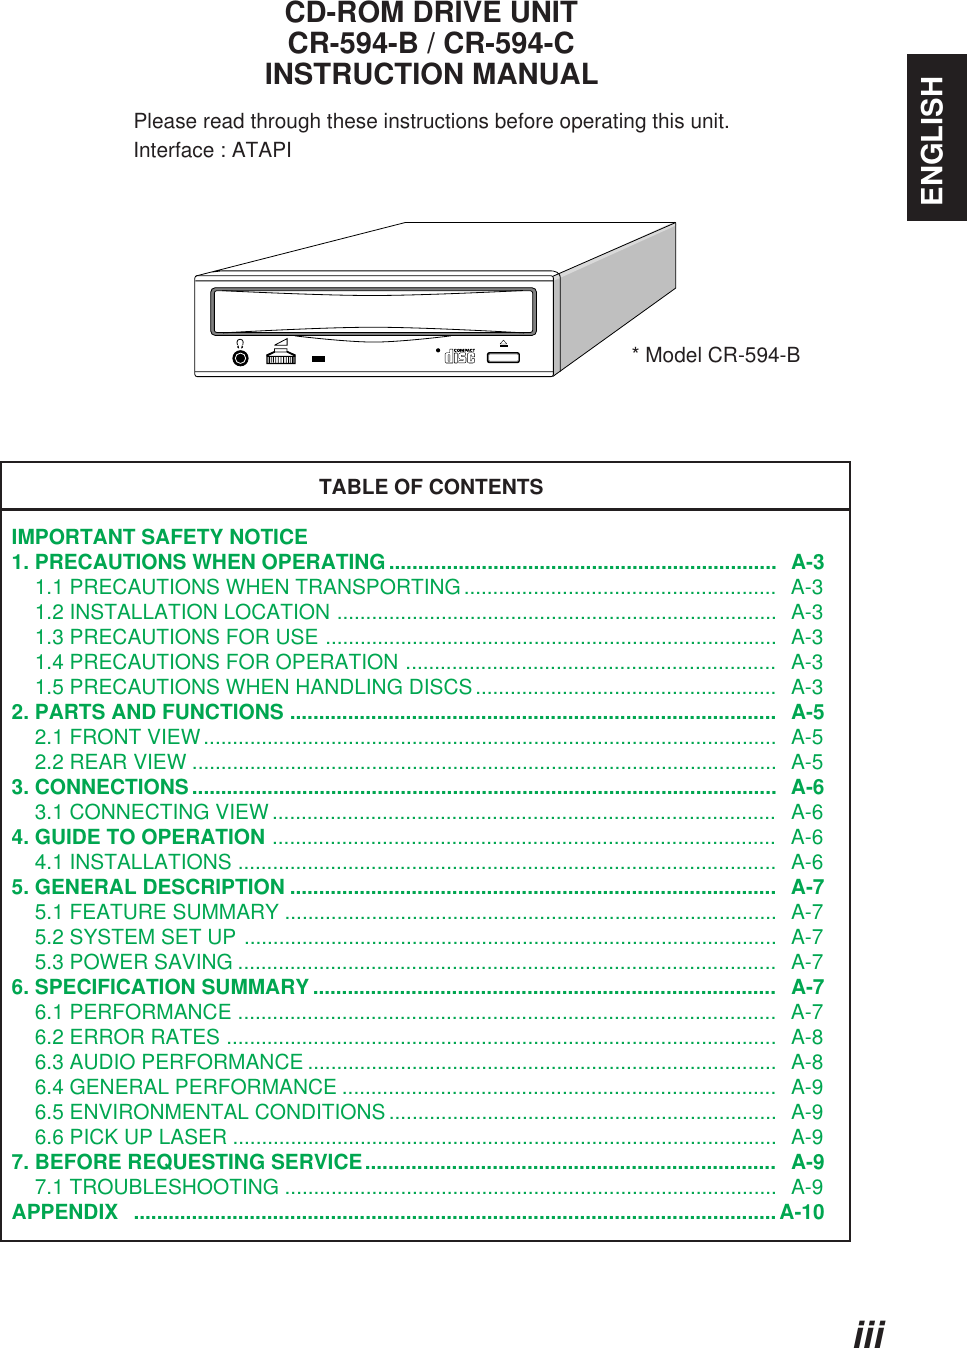 ENGLISHiiiCD-ROM DRIVE UNITCR-594-B / CR-594-CINSTRUCTION MANUALPlease read through these instructions before operating this unit.                     Interface : ATAPITABLE OF CONTENTSIMPORTANT SAFETY NOTICE1. PRECAUTIONS WHEN OPERATING...................................................................  A-3    1.1 PRECAUTIONS WHEN TRANSPORTING......................................................  A-3    1.2 INSTALLATION LOCATION ............................................................................  A-3    1.3 PRECAUTIONS FOR USE ..............................................................................  A-3    1.4 PRECAUTIONS FOR OPERATION ................................................................   A-3    1.5 PRECAUTIONS WHEN HANDLING DISCS....................................................   A-32. PARTS AND FUNCTIONS ....................................................................................   A-5    2.1 FRONT VIEW...................................................................................................  A-5    2.2 REAR VIEW .....................................................................................................  A-53. CONNECTIONS.....................................................................................................  A-6    3.1 CONNECTING VIEW .......................................................................................   A-64. GUIDE TO OPERATION .......................................................................................   A-6    4.1 INSTALLATIONS .............................................................................................   A-65. GENERAL DESCRIPTION ....................................................................................  A-7    5.1 FEATURE SUMMARY .....................................................................................  A-7    5.2 SYSTEM SET UP ............................................................................................  A-7    5.3 POWER SAVING .............................................................................................  A-76. SPECIFICATION SUMMARY ................................................................................   A-7    6.1 PERFORMANCE .............................................................................................   A-7    6.2 ERROR RATES ...............................................................................................   A-8    6.3 AUDIO PERFORMANCE .................................................................................  A-8    6.4 GENERAL PERFORMANCE ...........................................................................  A-9    6.5 ENVIRONMENTAL CONDITIONS ...................................................................  A-9    6.6 PICK UP LASER ..............................................................................................  A-97. BEFORE REQUESTING SERVICE.......................................................................  A-9    7.1 TROUBLESHOOTING .....................................................................................  A-9APPENDIX ...............................................................................................................A-10* Model CR-594-B